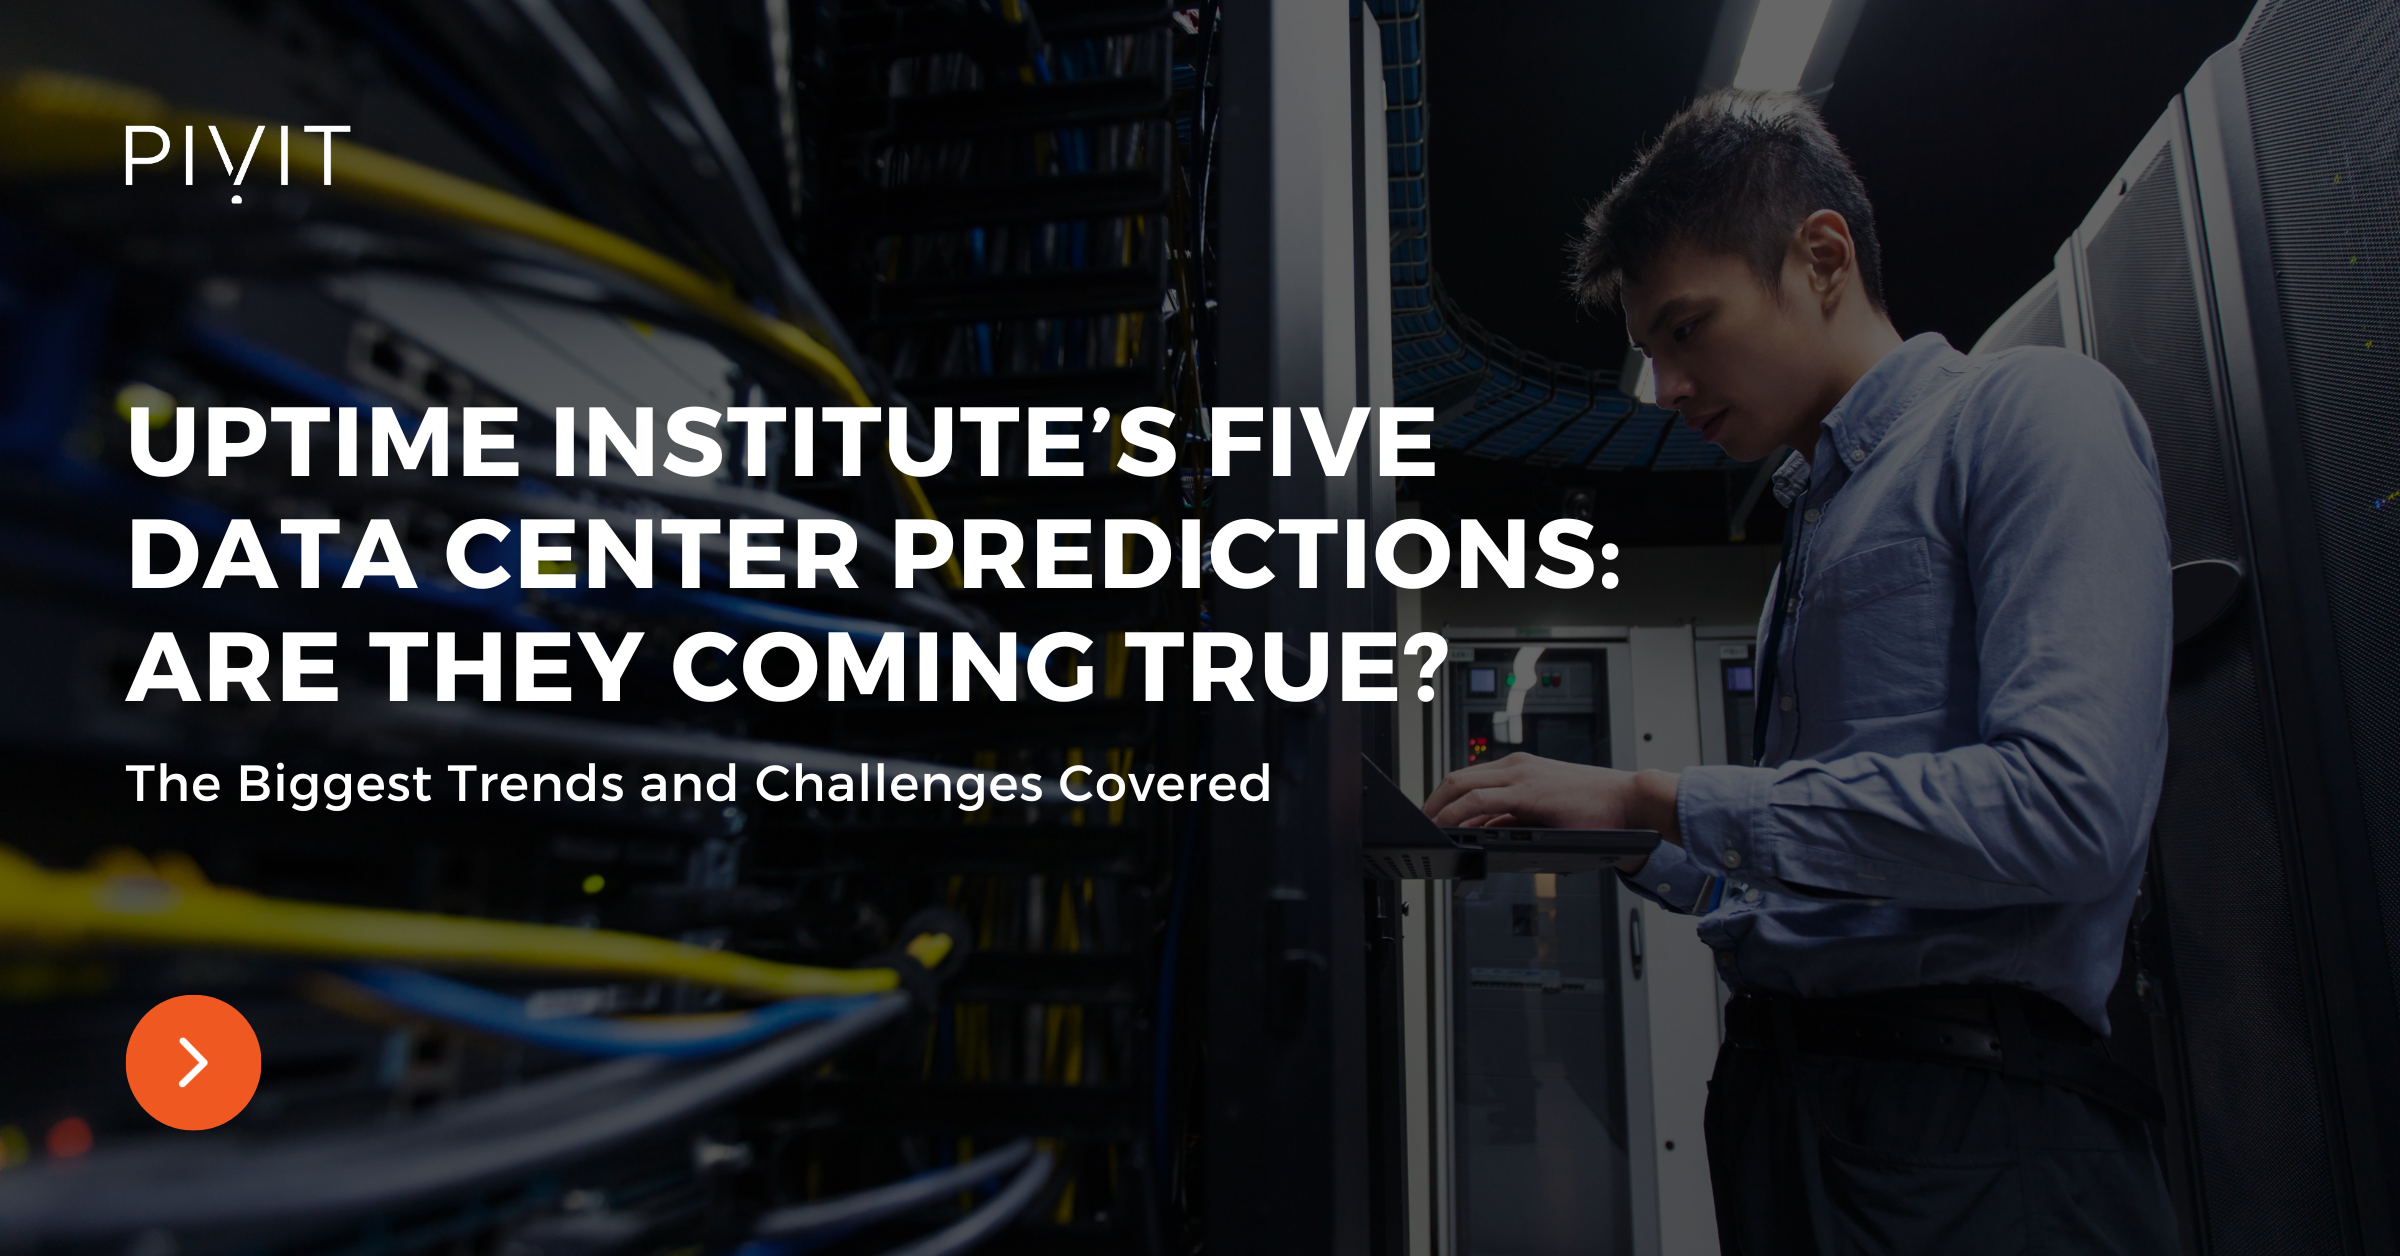 Uptime Institute’s Five Data Center Predictions: Are They Coming True - The Biggest Trends and Challenges Covered